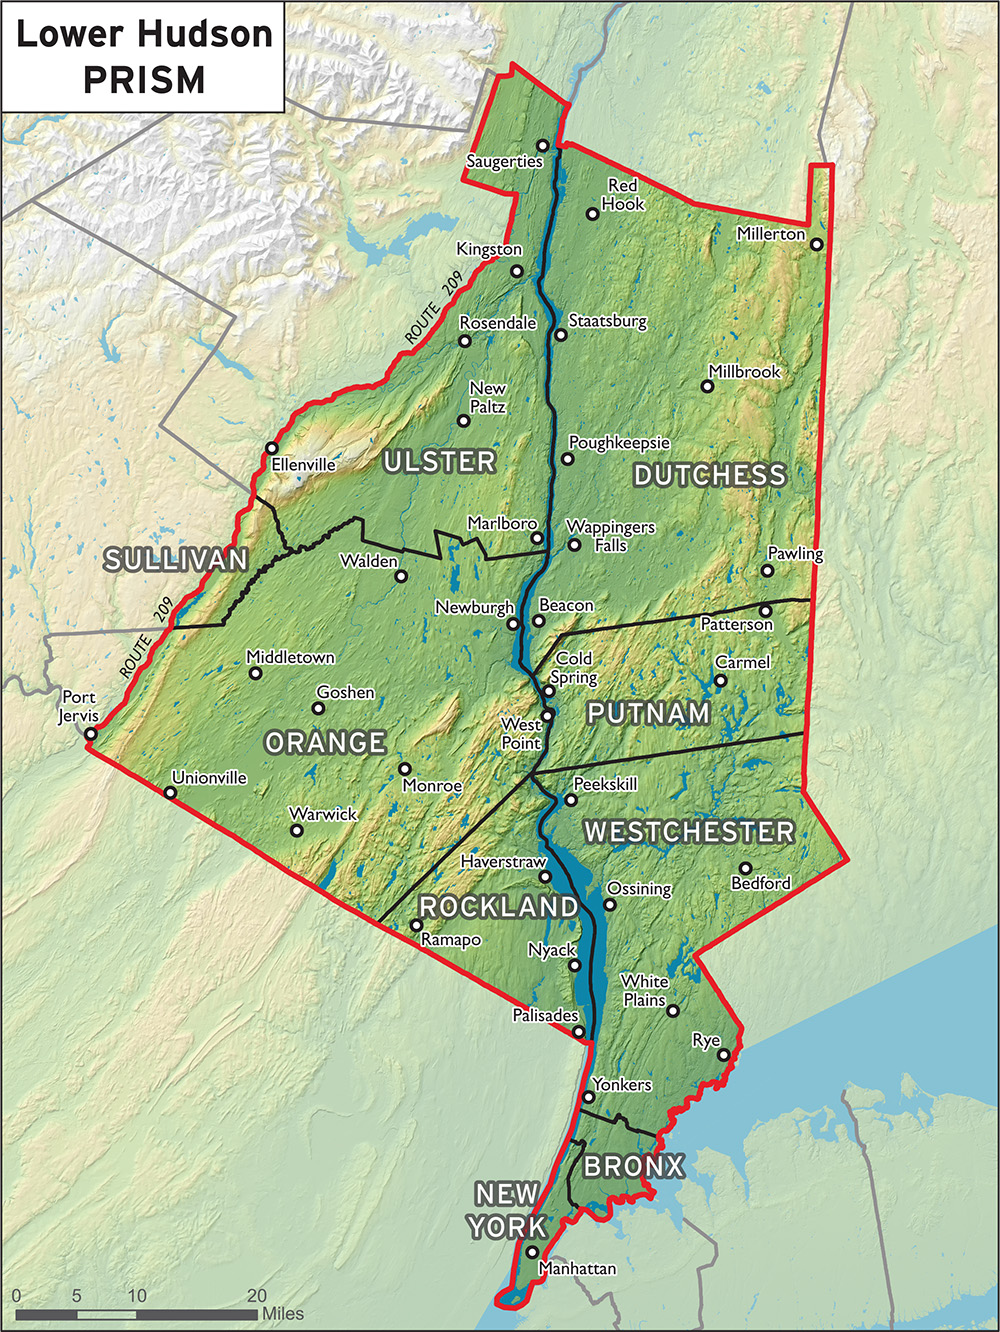 Map of Lower Hudson PRISM area